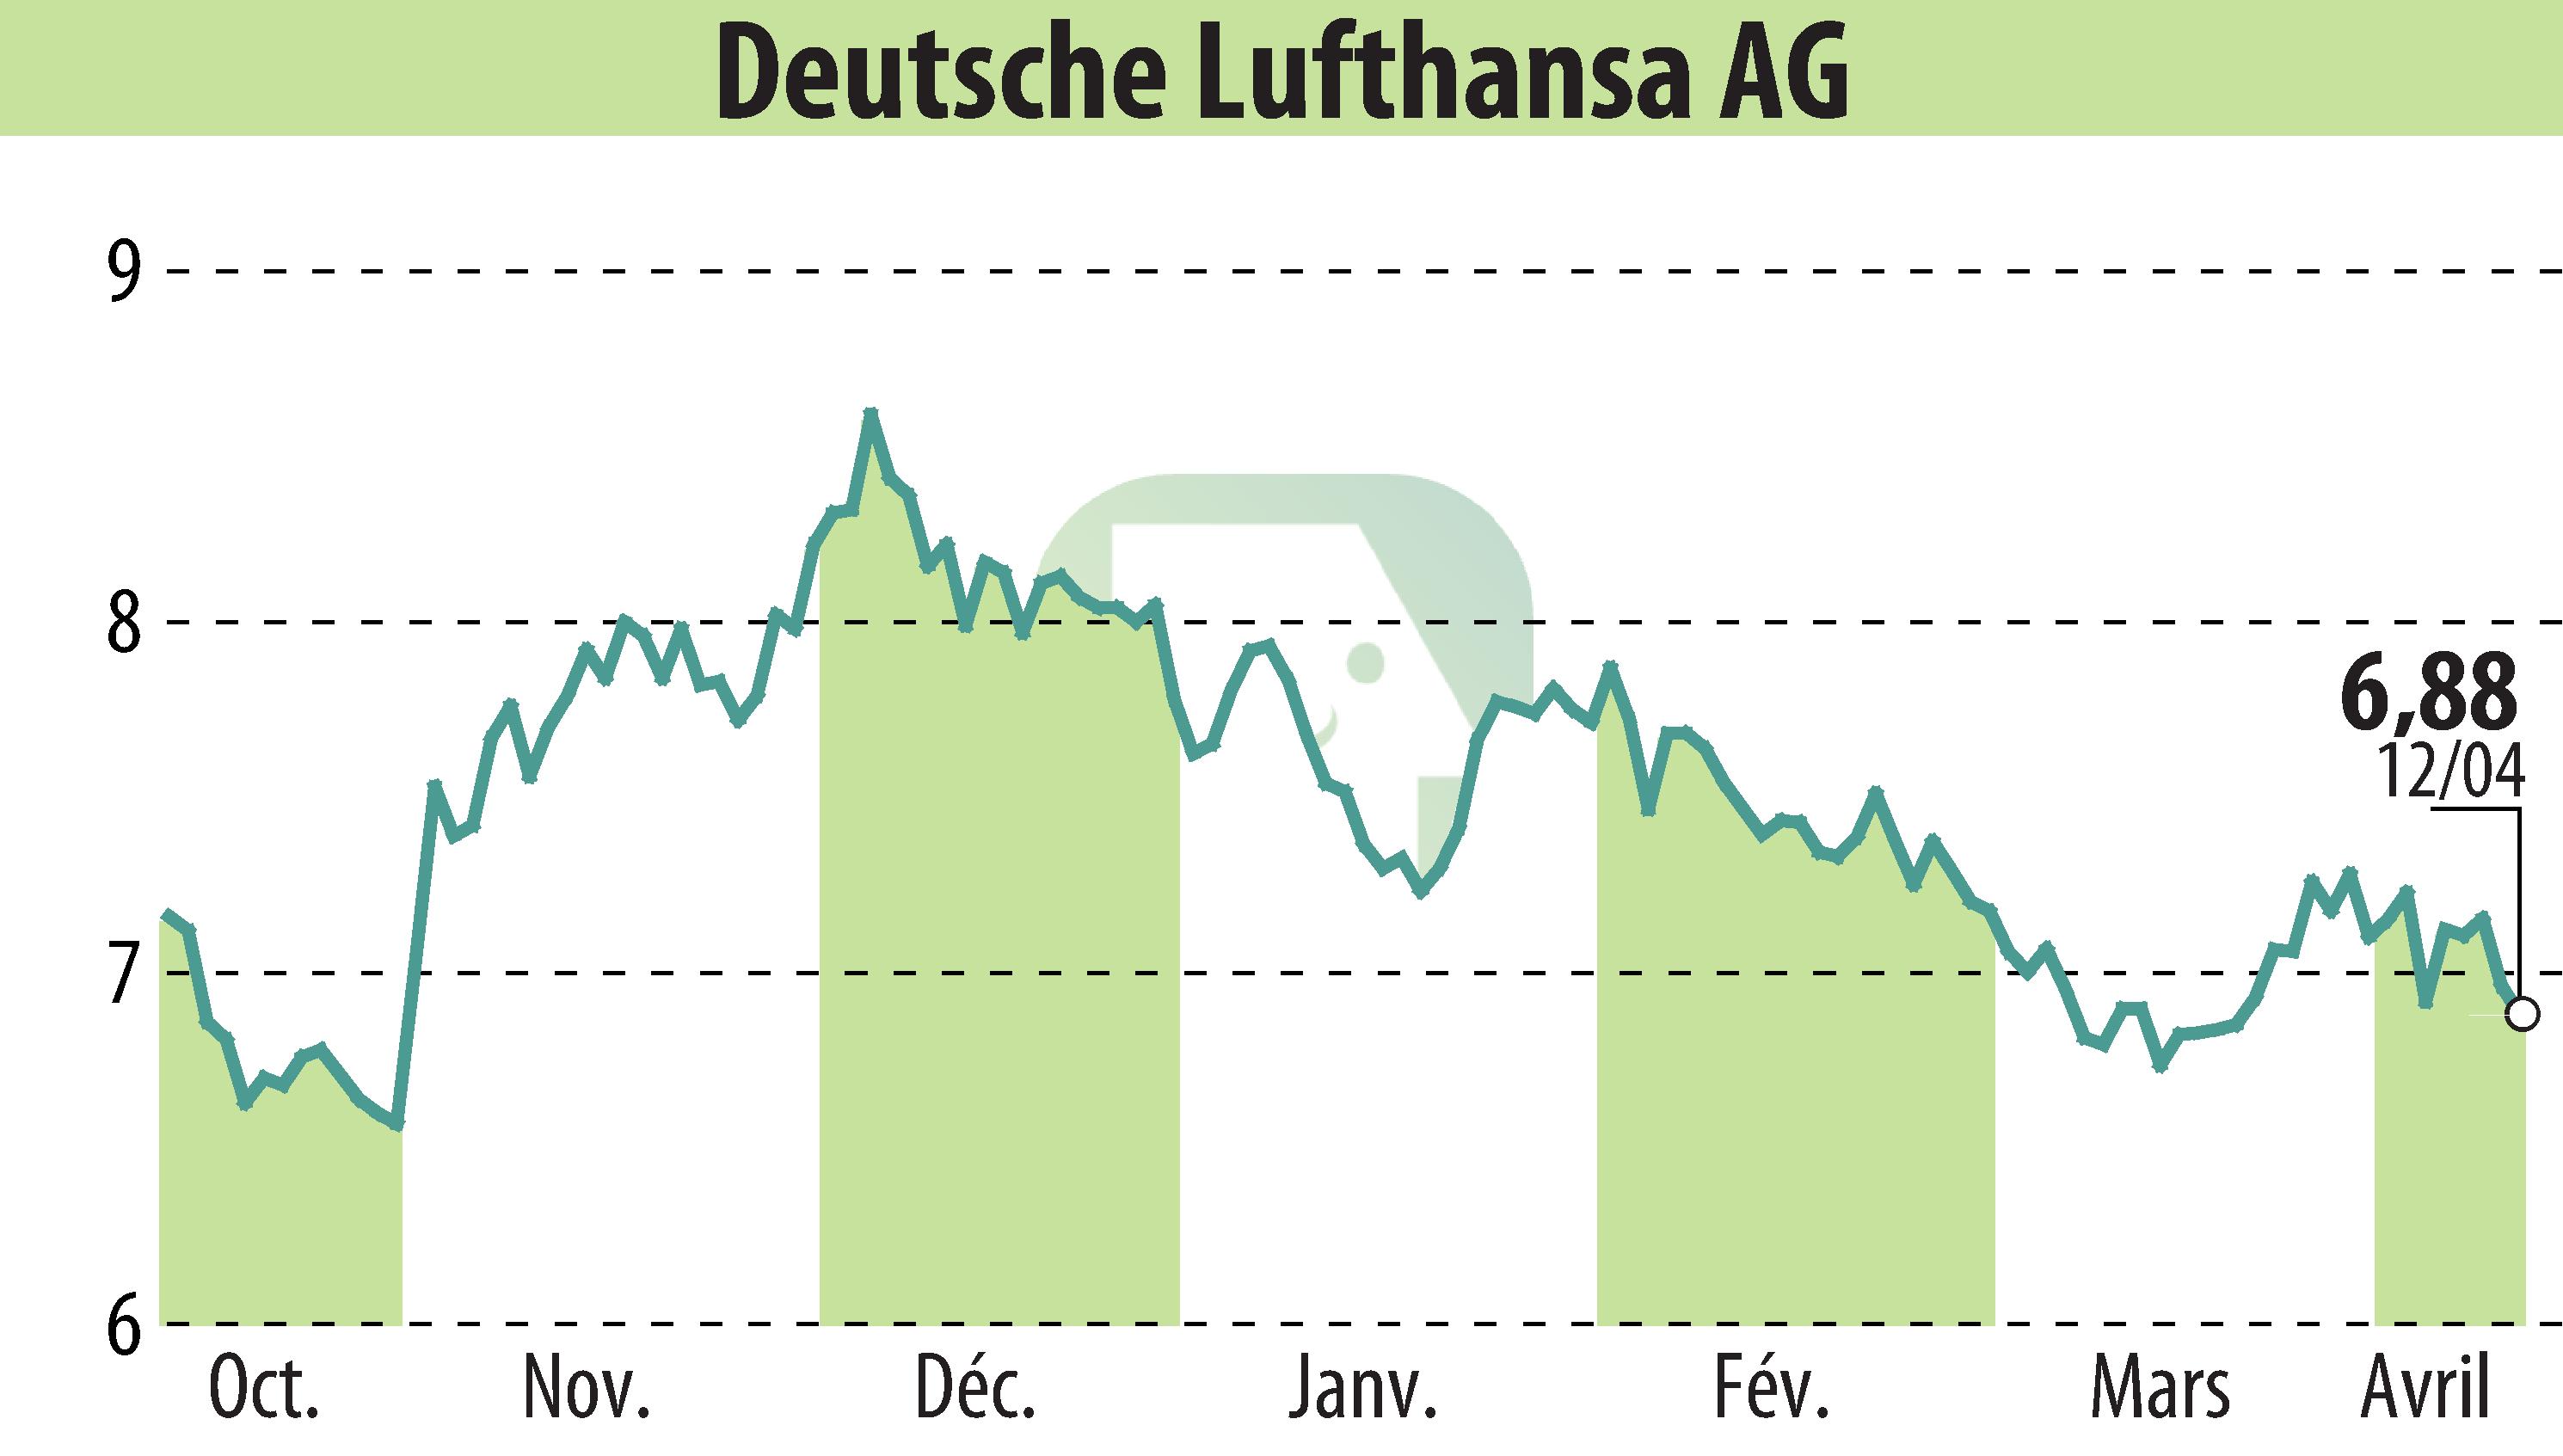 Stock price chart of Deutsche Lufthansa AG (EBR:LHA) showing fluctuations.